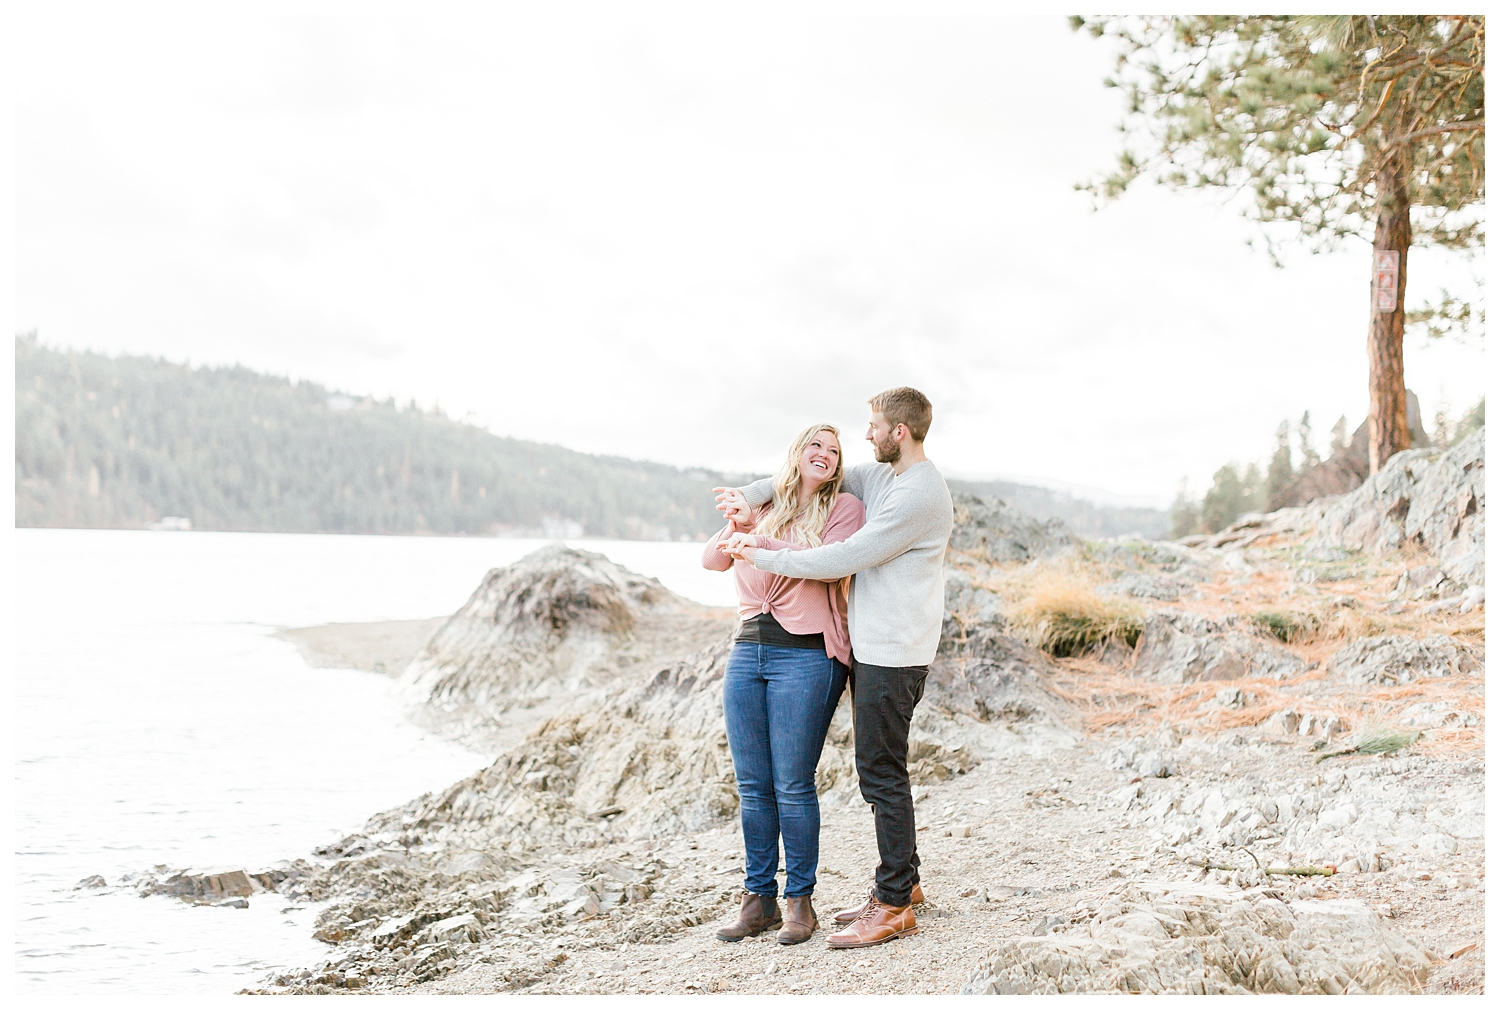 Coeur d'Alene Engagement Photography Session at Lake Coeur d"Alene by Danell Krista of La Belle Bella Photography